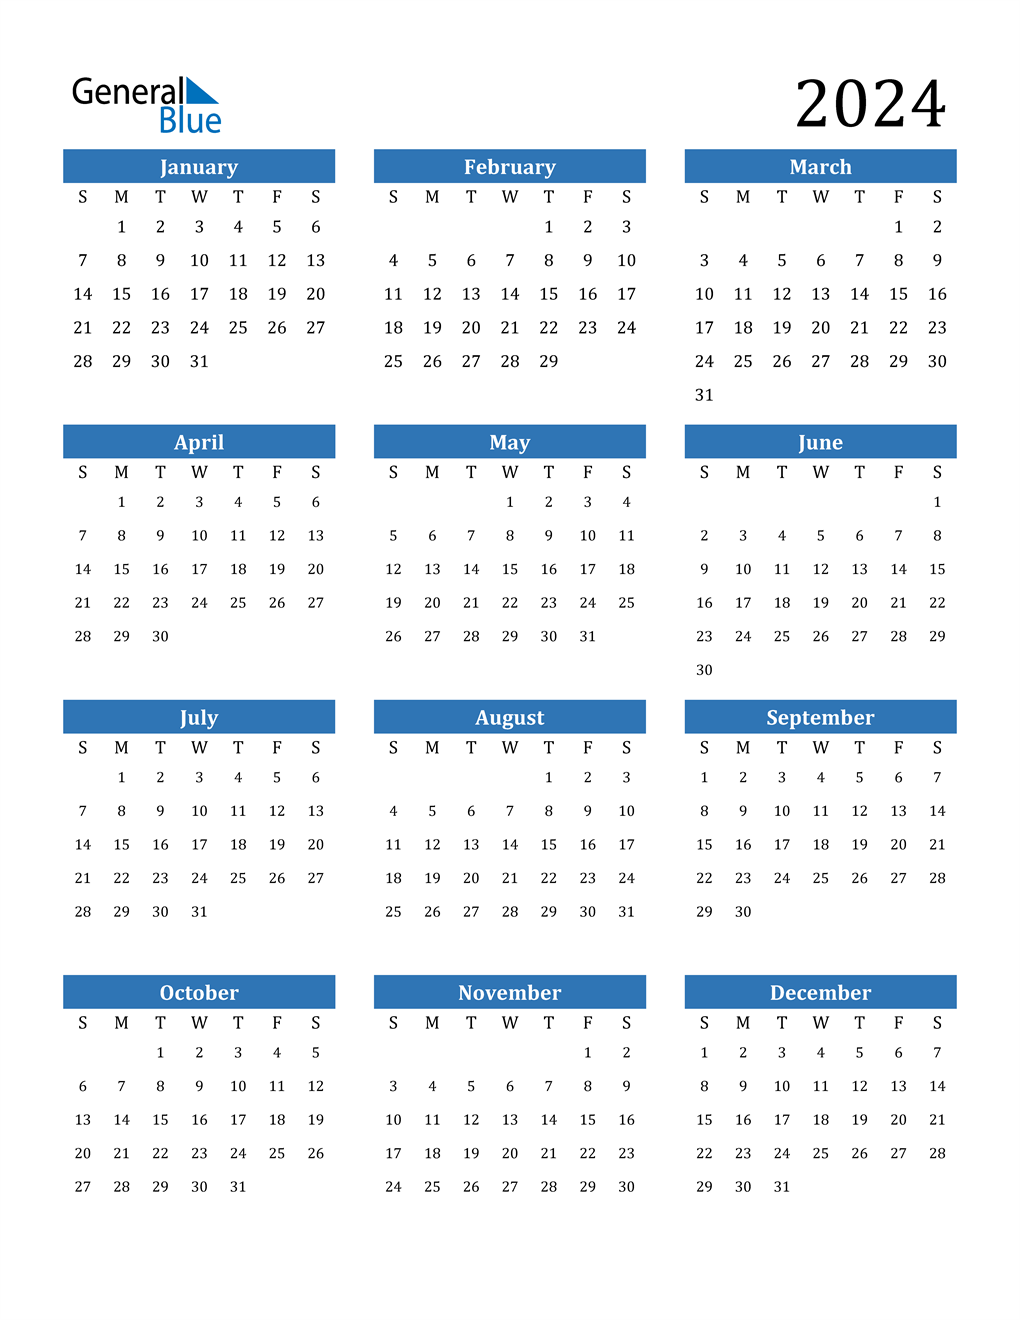 2024 Calendar Printable Free - Free Printable 2024 Calendar With Holidays Month By Month